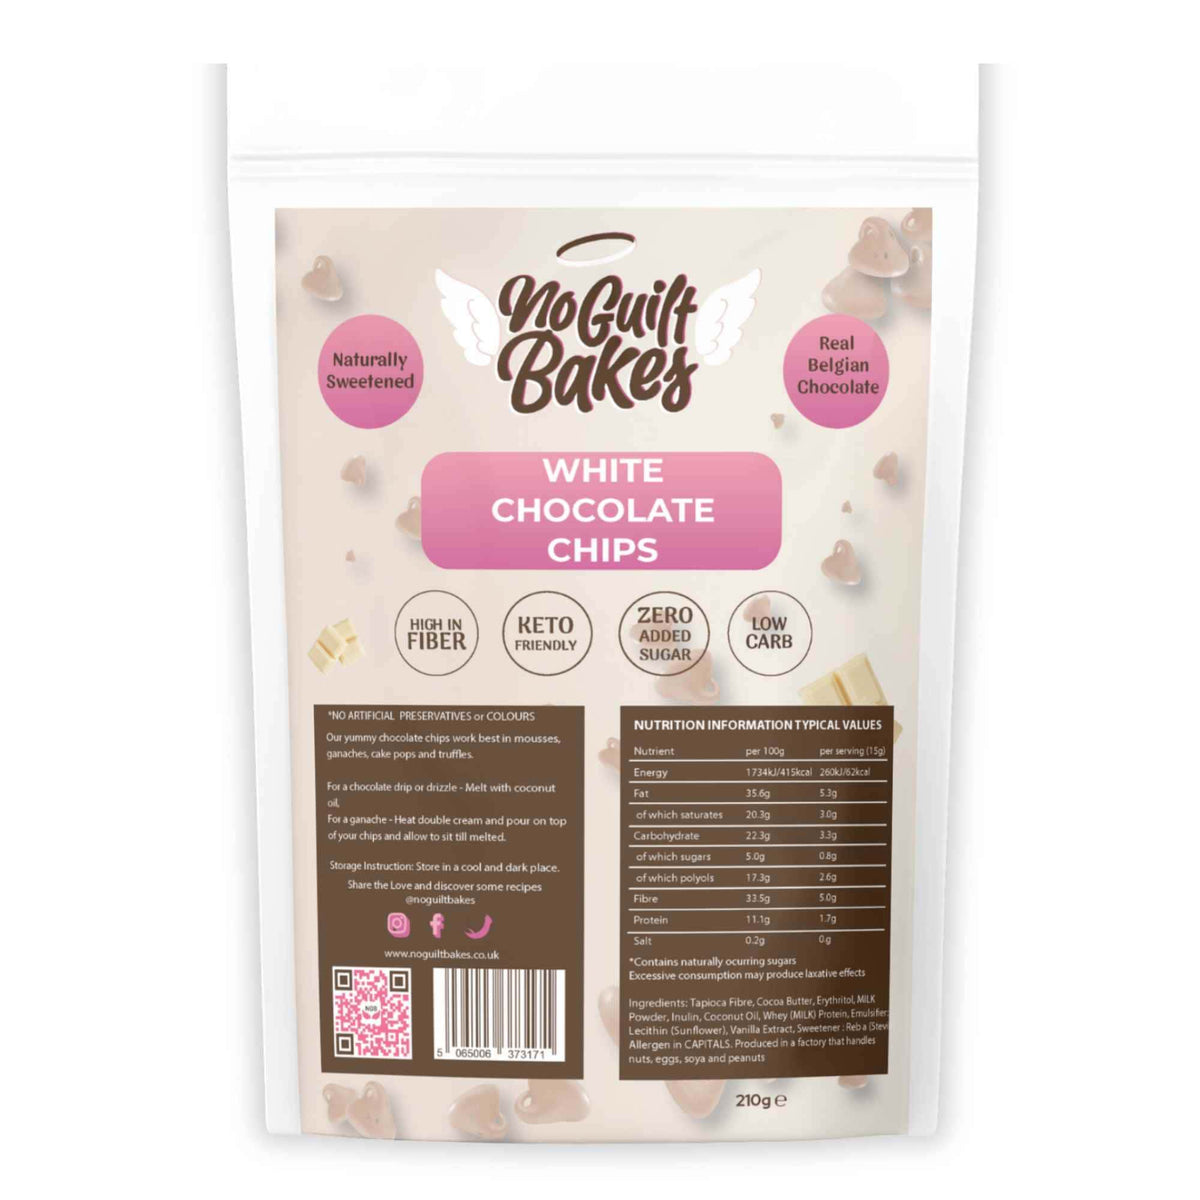 Belgian White chocolate chips from No Guilt Bakes are deliciously low-carb keto-friendly treats that are perfect for chocolate lovers.